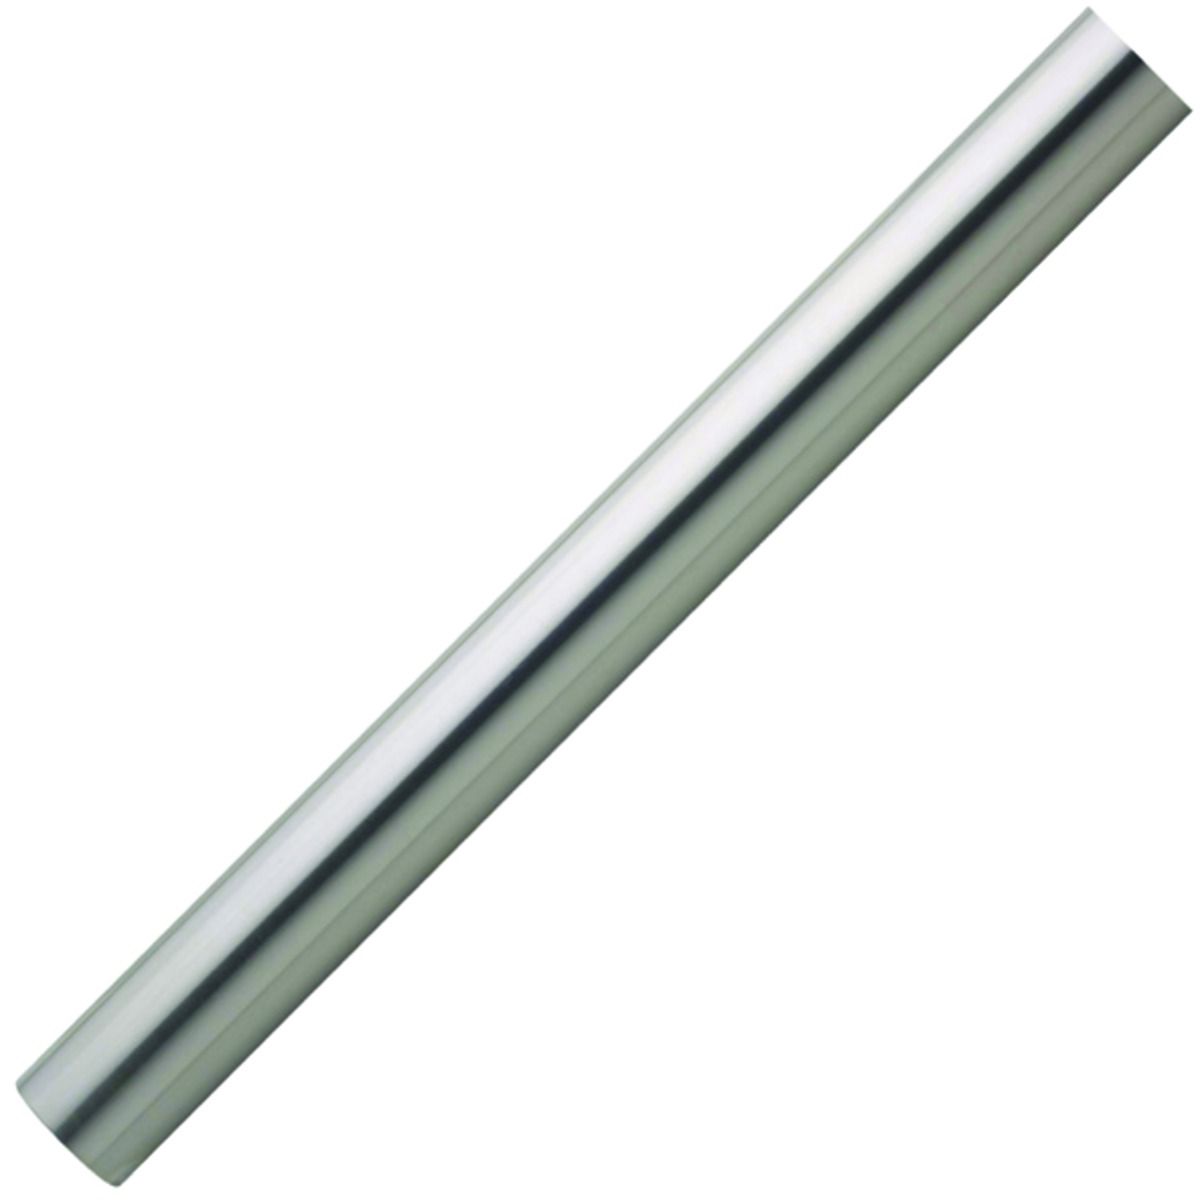 Image of Wickes Brushed Finish Handrail - 40mm x 3.6m